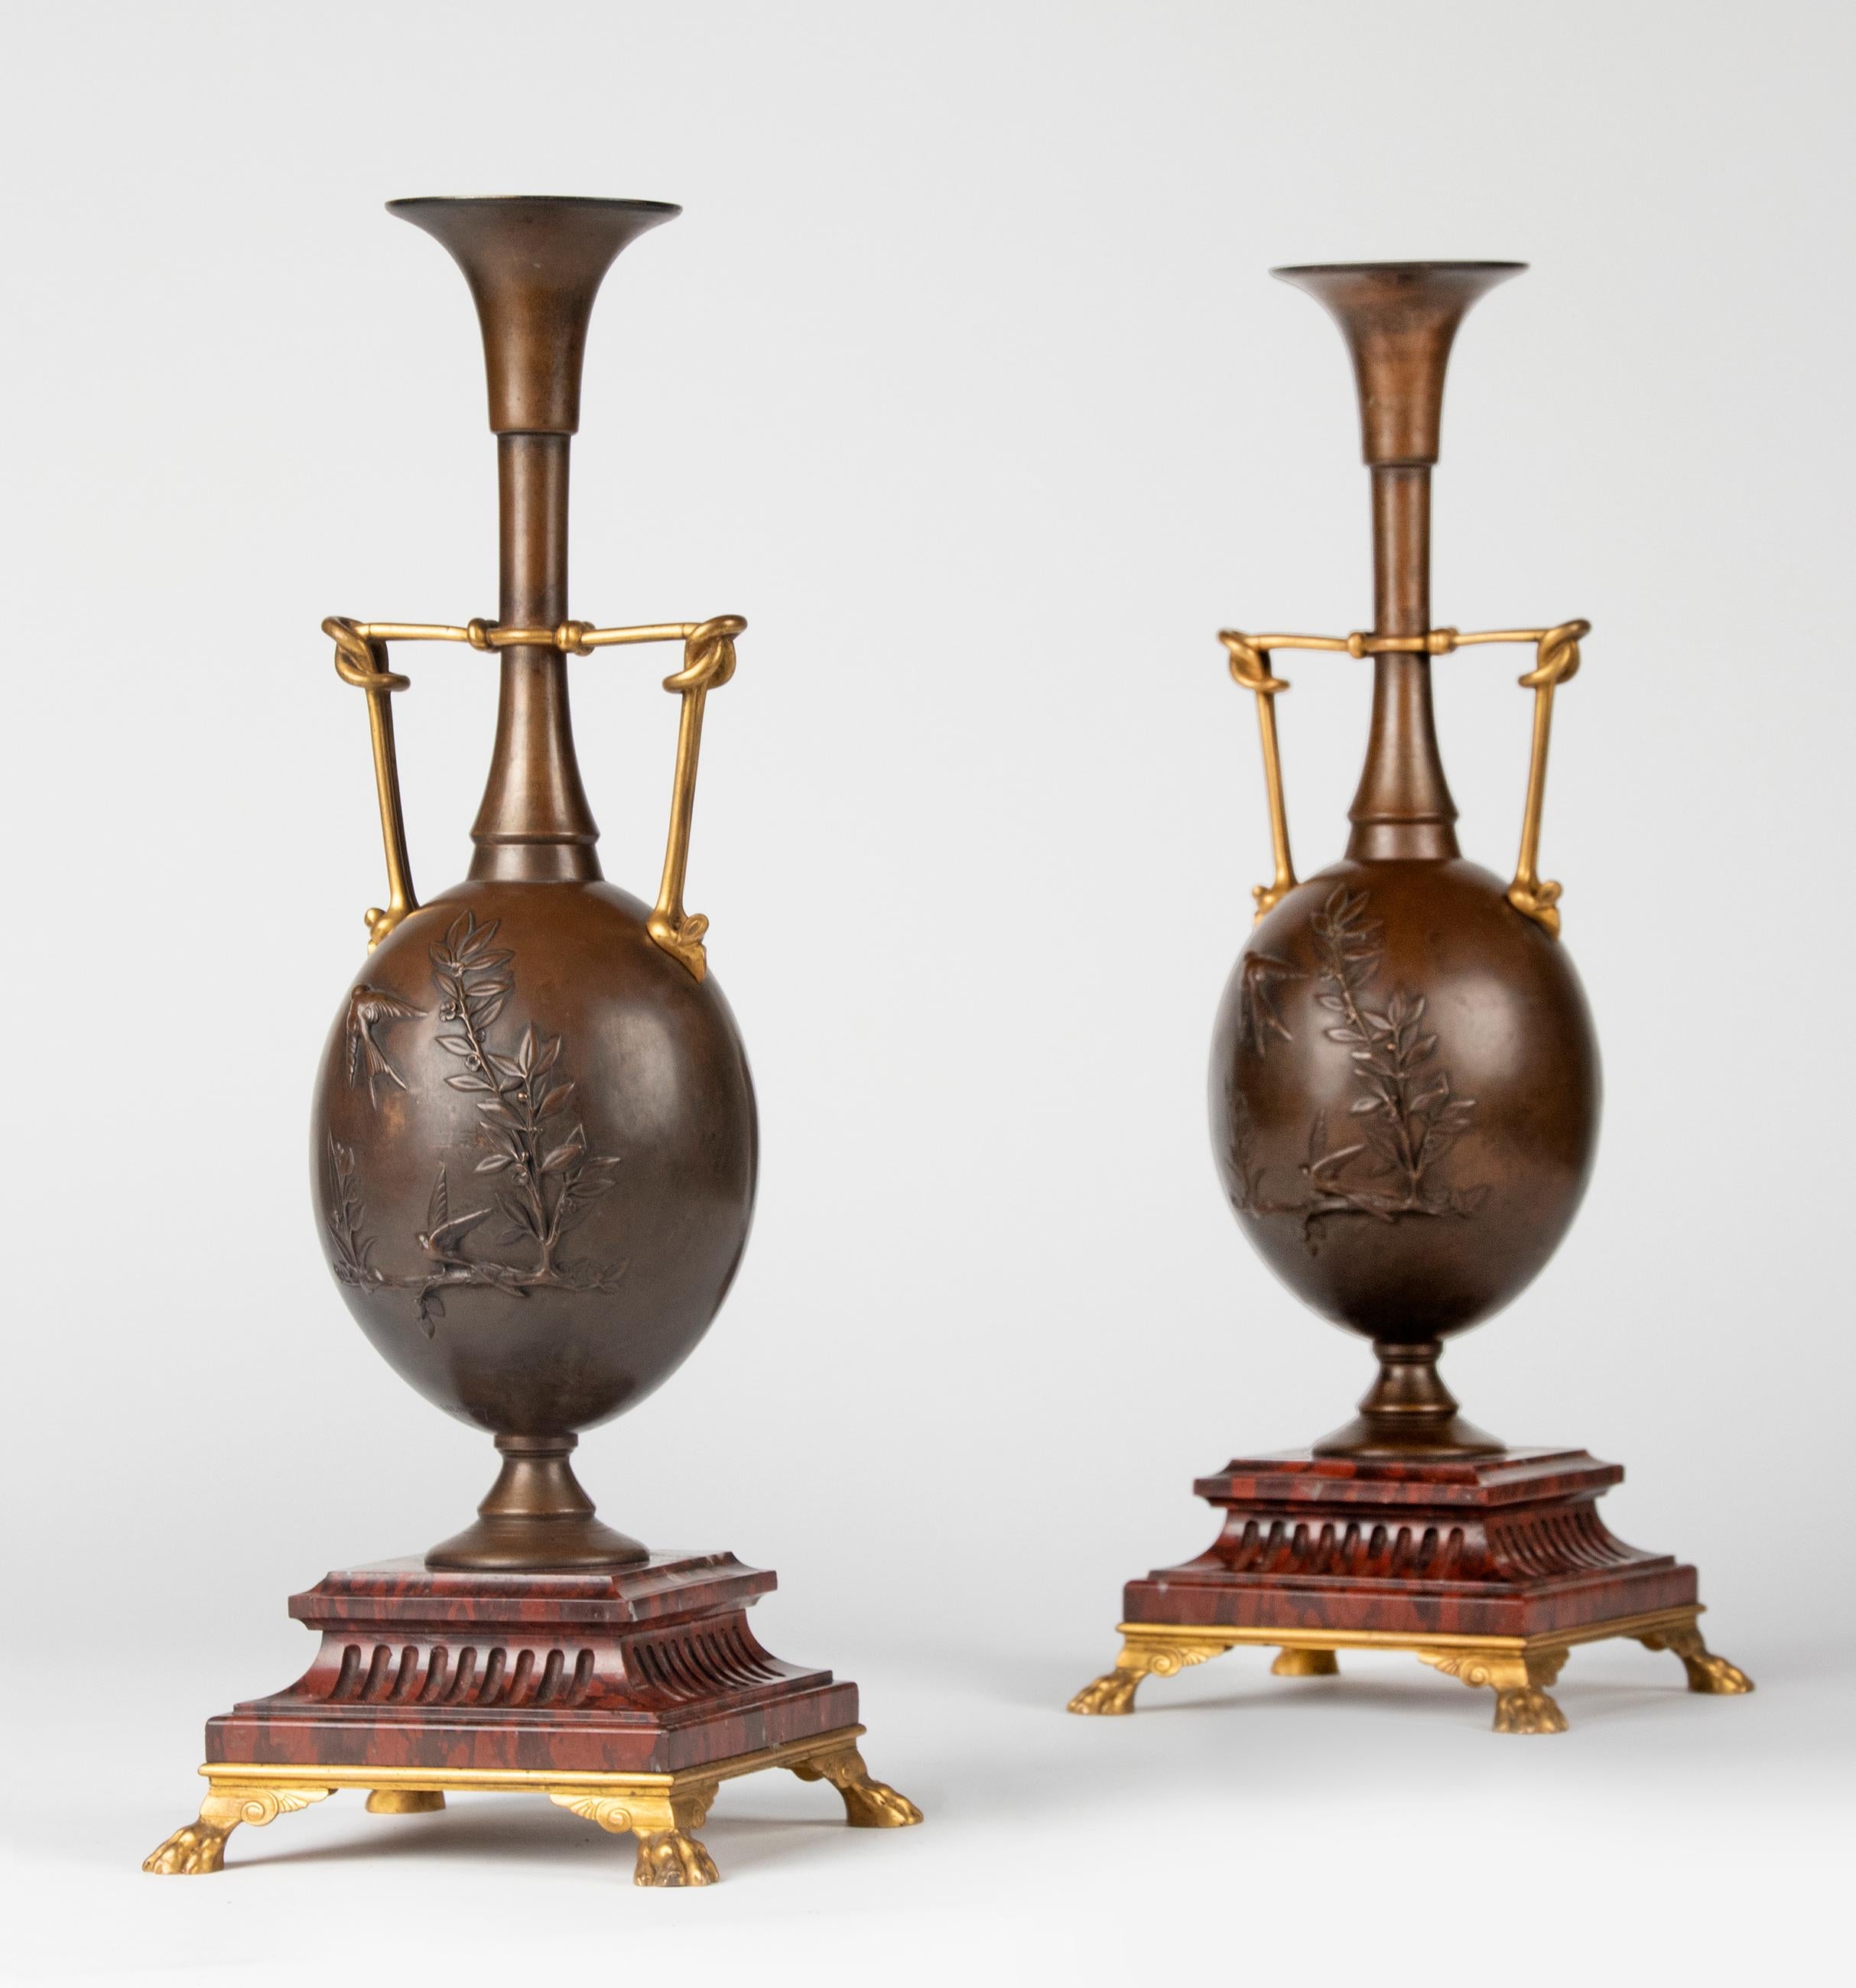 A fine pair of French ormolu and patinated bronze vases, baluster shaft with relief decoration of swallows and vegetation. Both artist names are signed, Henry Cahieux (1825-1854) and Ferdinand Barbedienne (1810-1892). Cahieux and Barbedienne one of